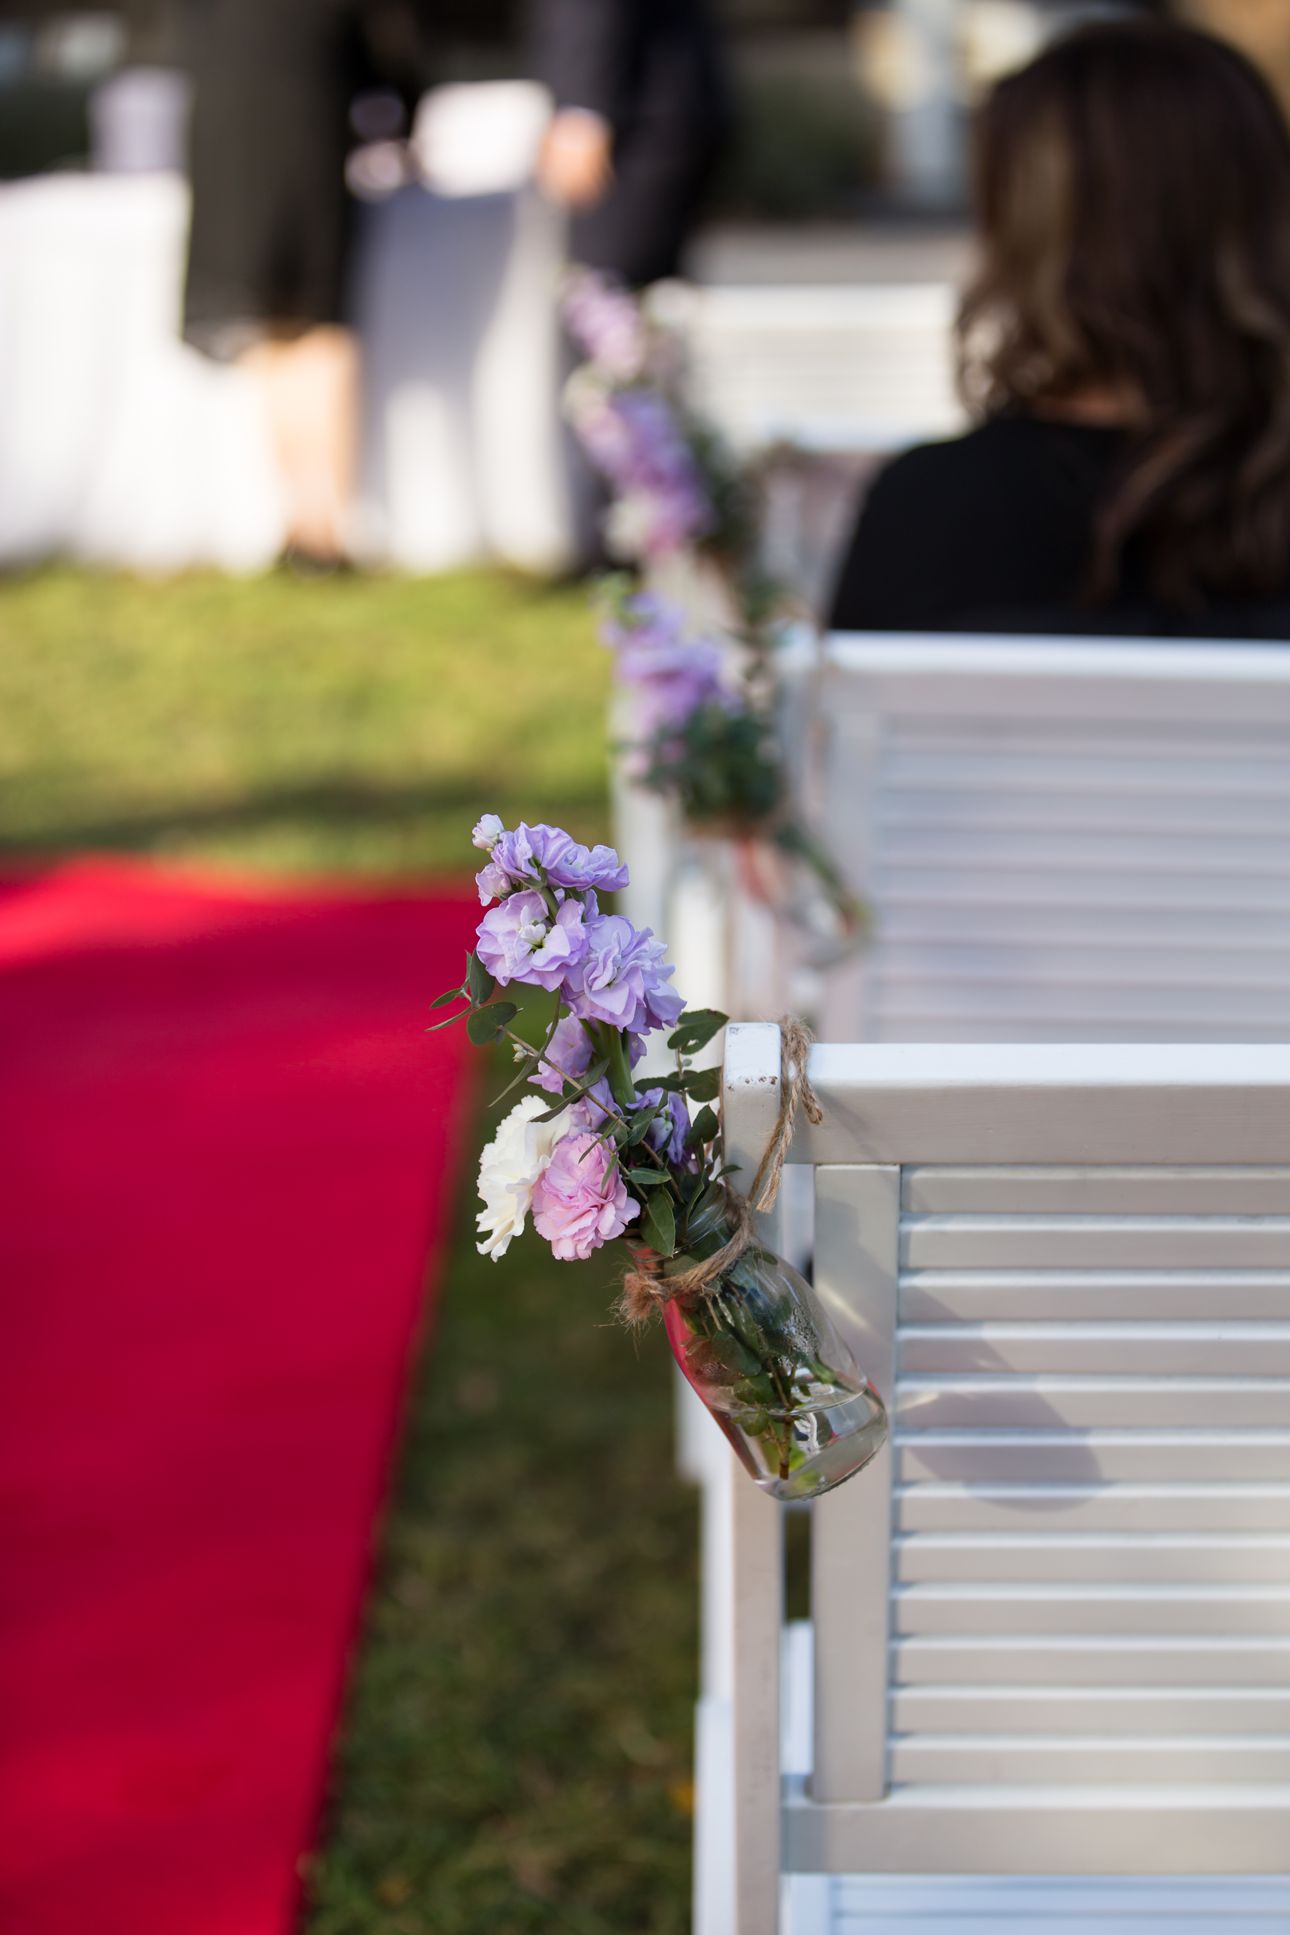 Say "Yes" at Eynesbury Homestead - A captivating wedding venue for your Melbourne celebration.